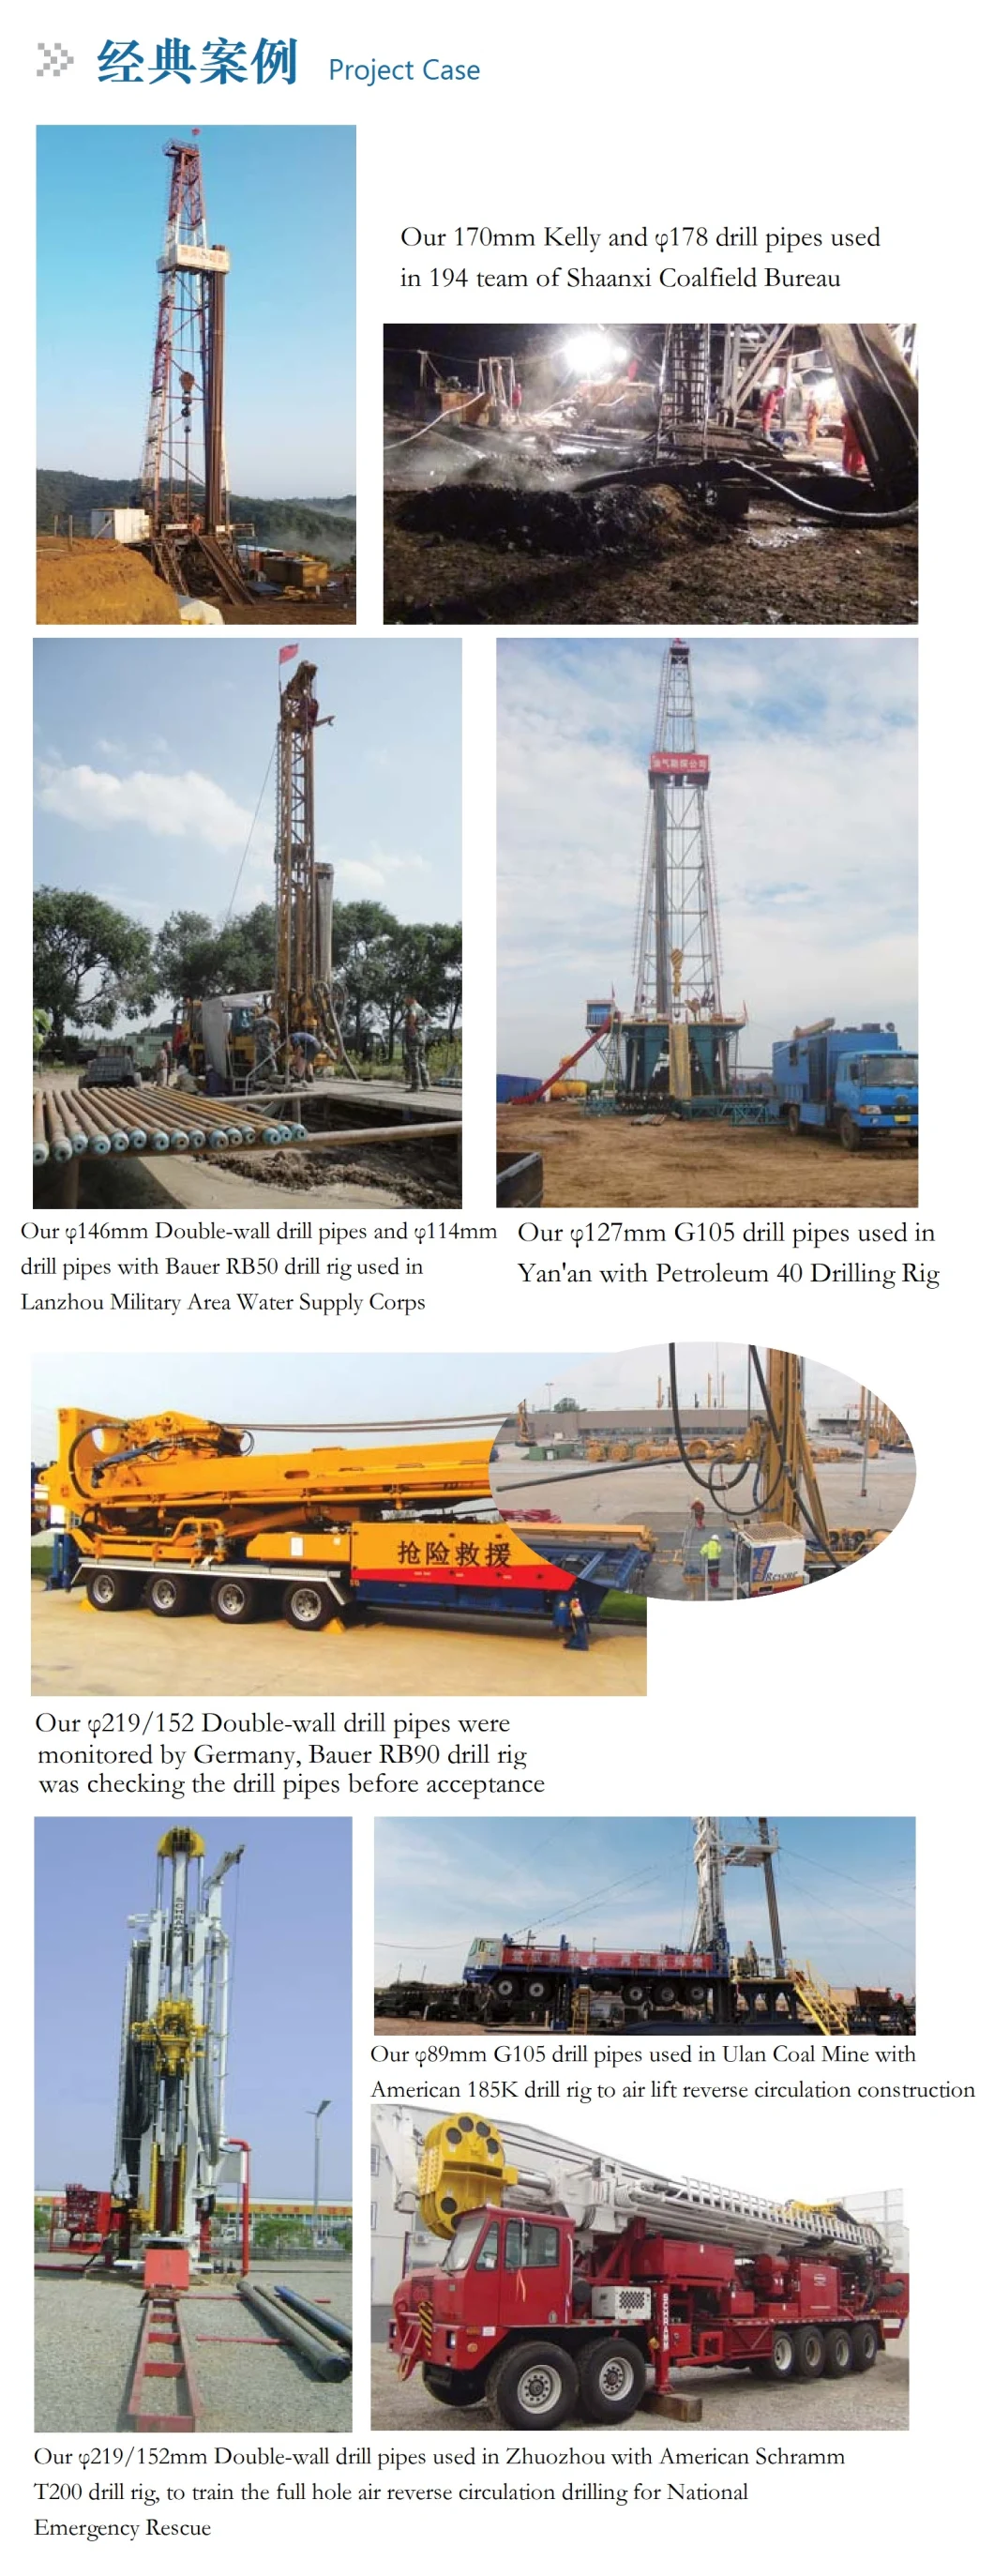 Spt-800 Drilling Rig for Geological and Geothermal Development